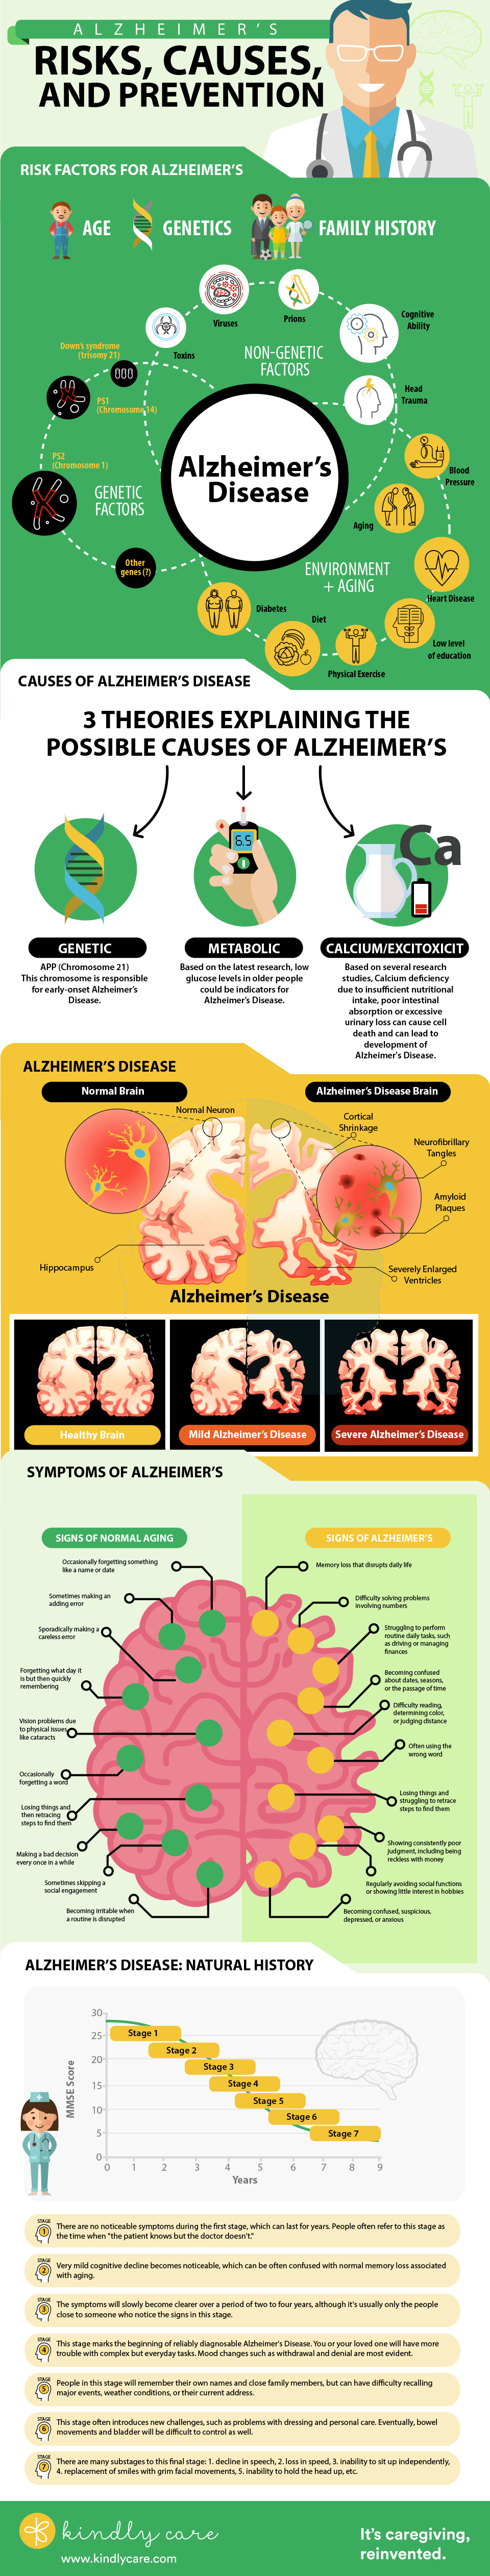 There wont be a cure for Alzheimers disease in our lifetime